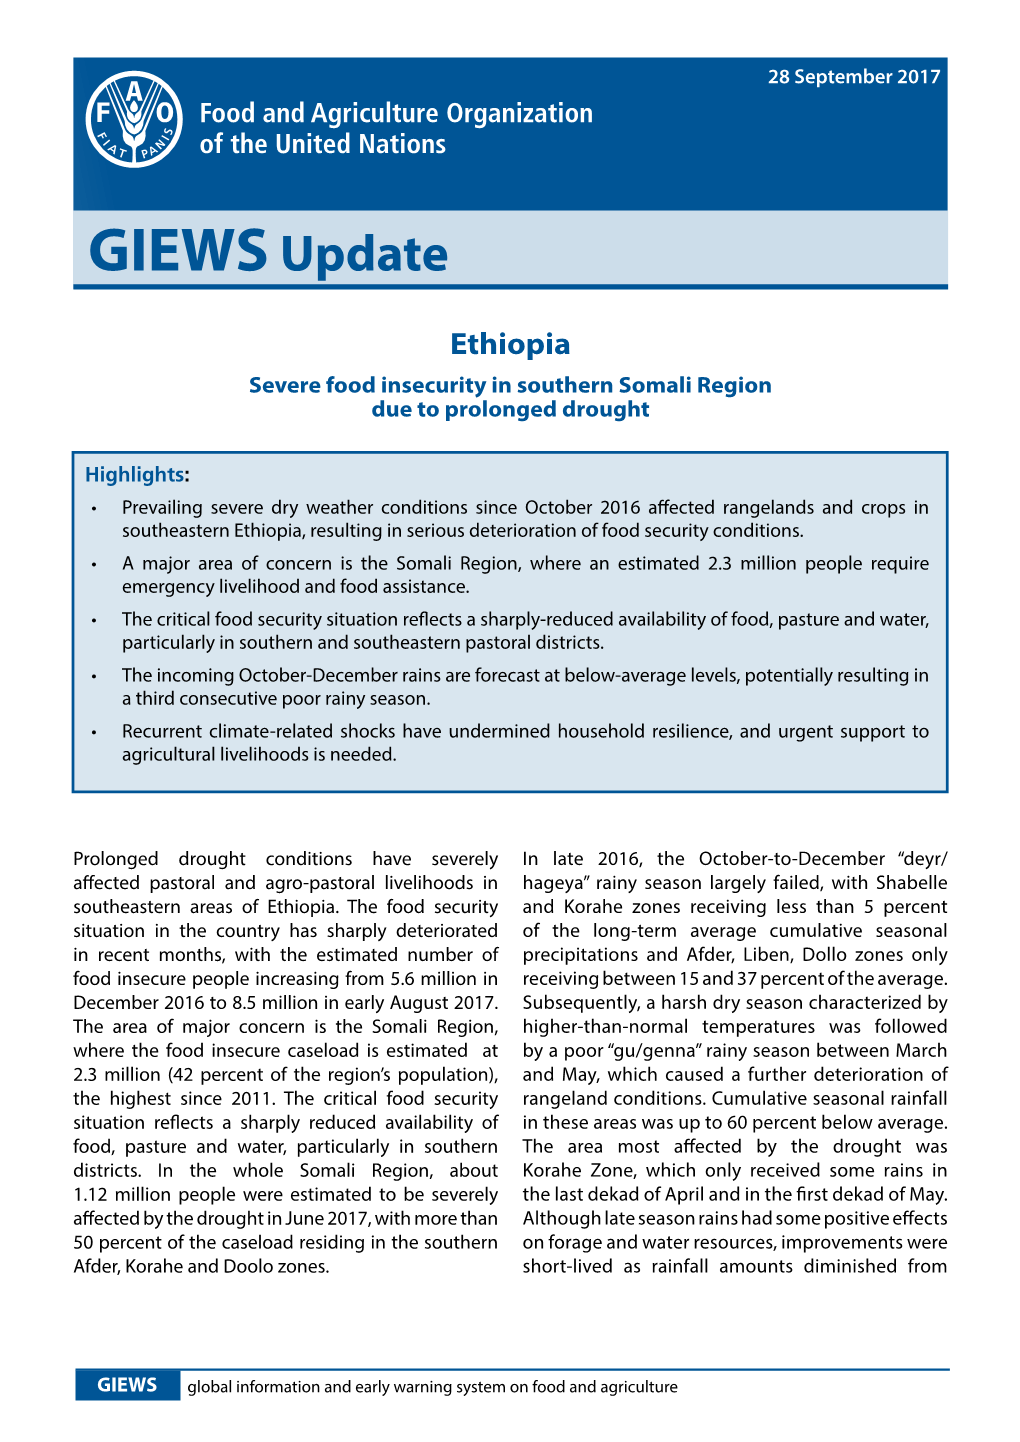 Ethiopia Severe Food Insecurity in Southern Somali Region Due to Prolonged Drought